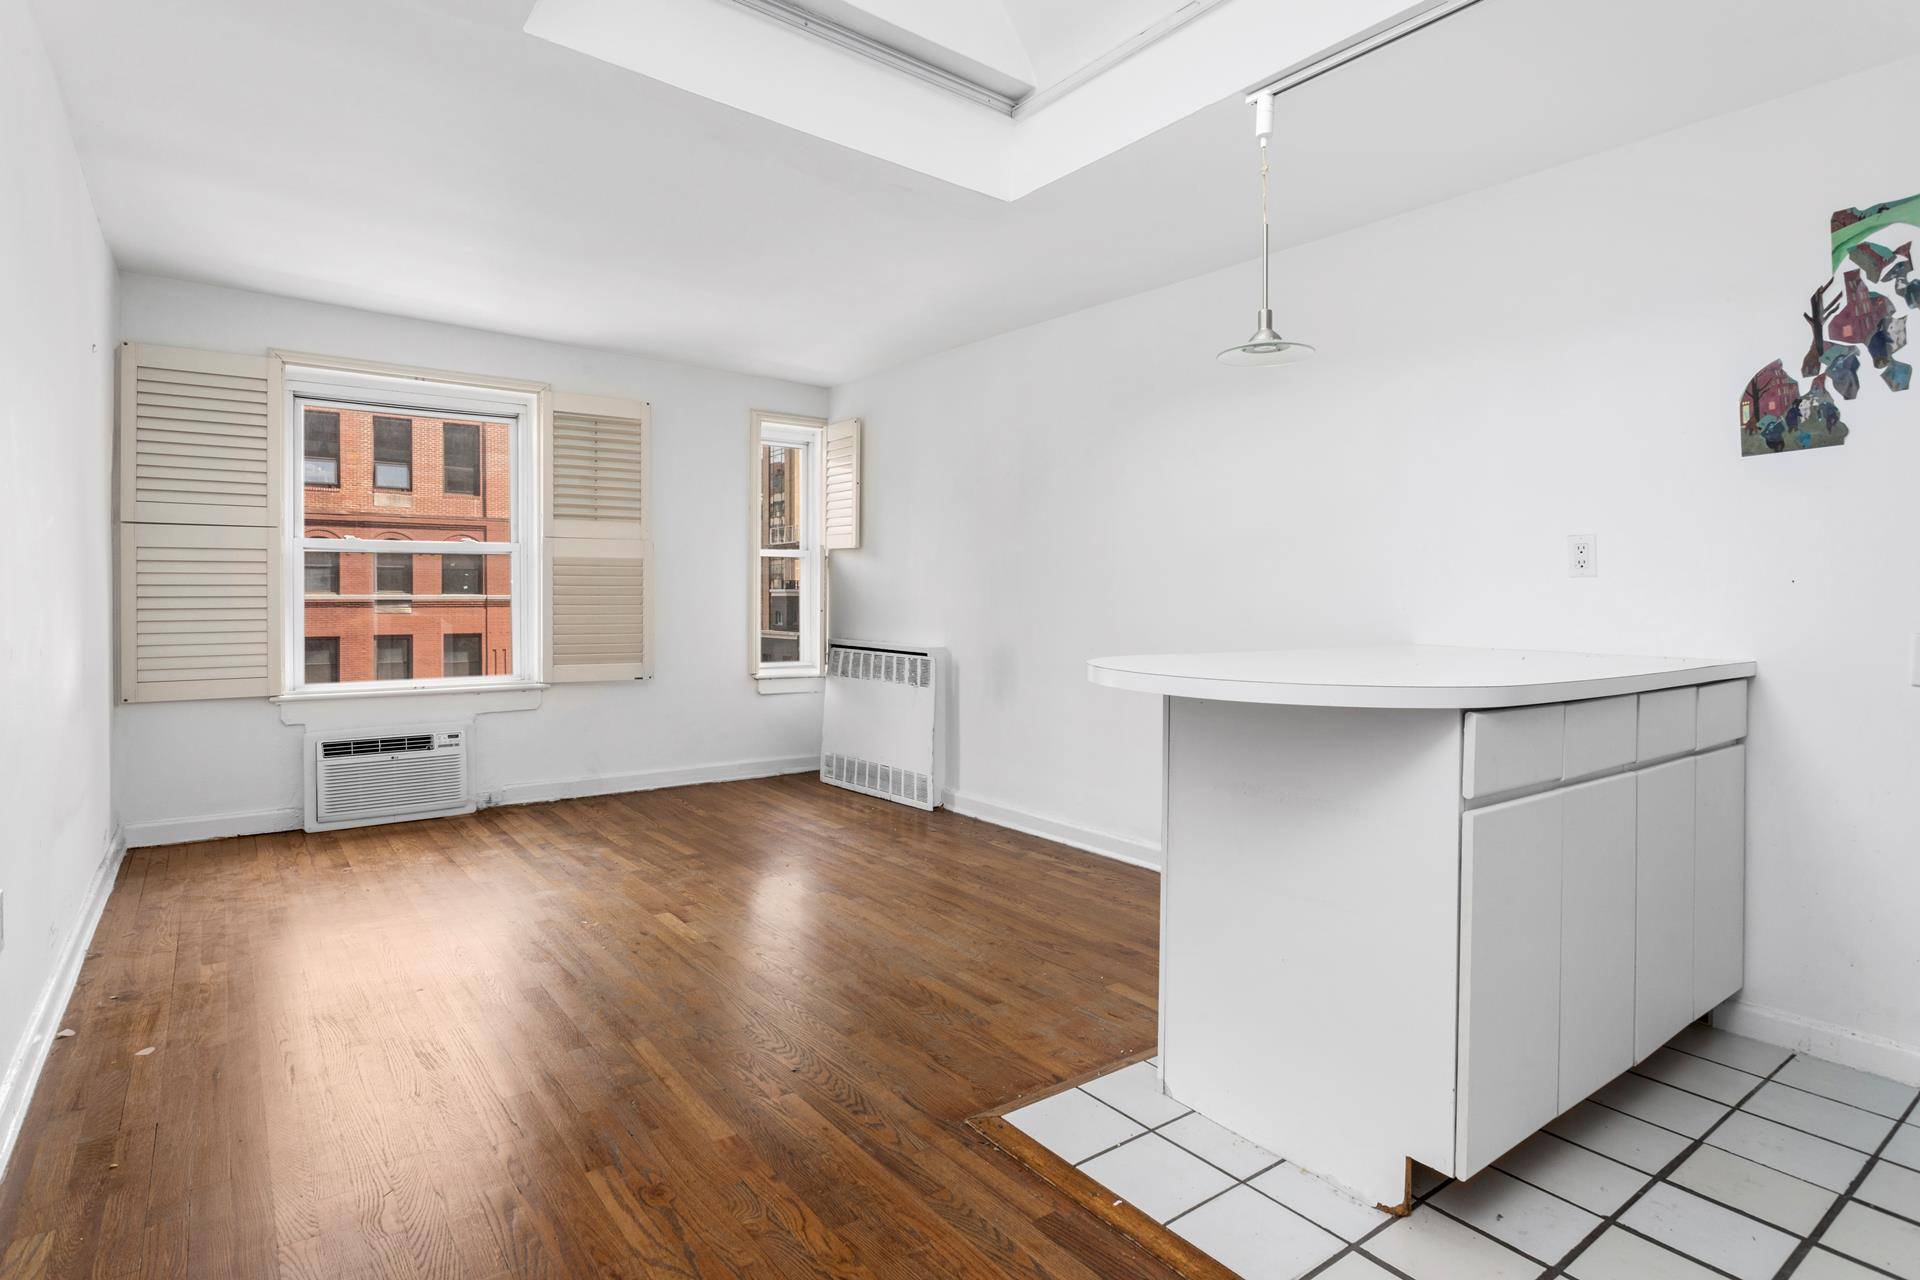 Welcome to 151 East 20th, Unit 5F.